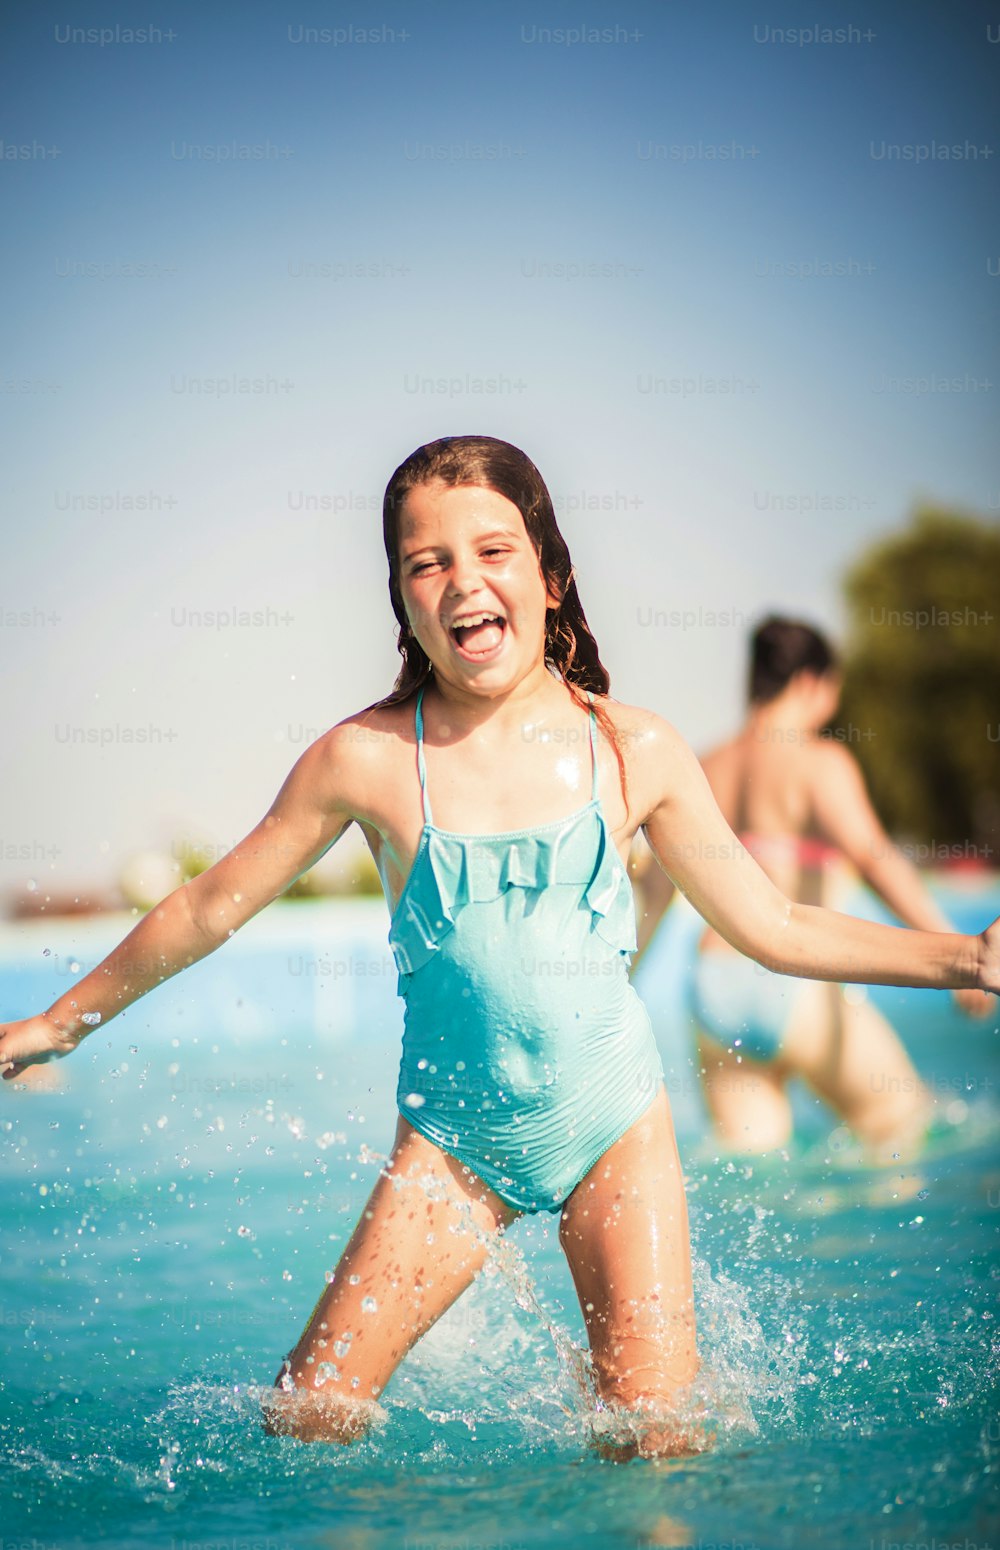 Feel the power of the summer. Child in the pool.